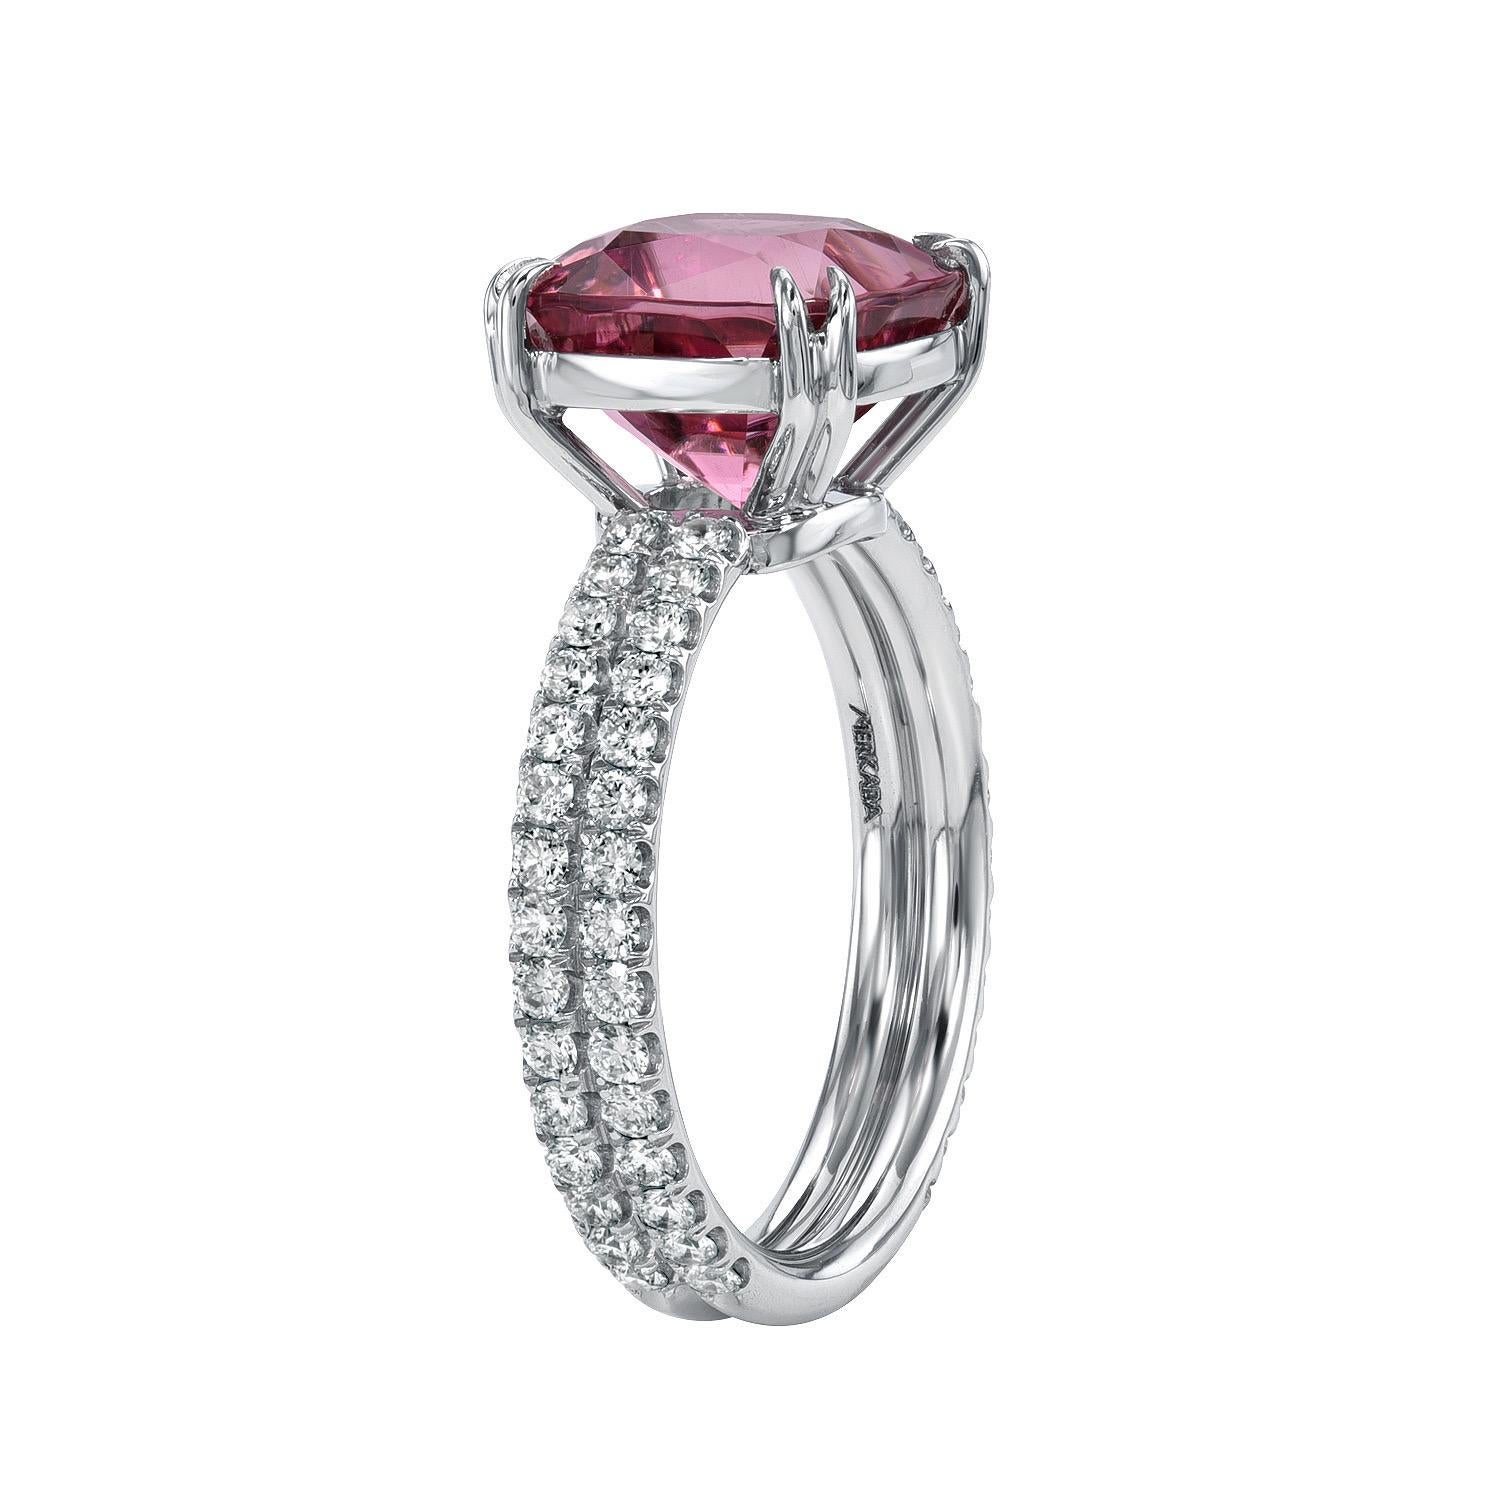 3.93 carat Hot Pink Tourmaline cushion platinum ring decorated with a total of 0.75 carat round brilliant collection diamonds.
Ring size 6. Resizing is complementary upon request.
Crafted by extremely skilled hands in the USA.
Returns are accepted